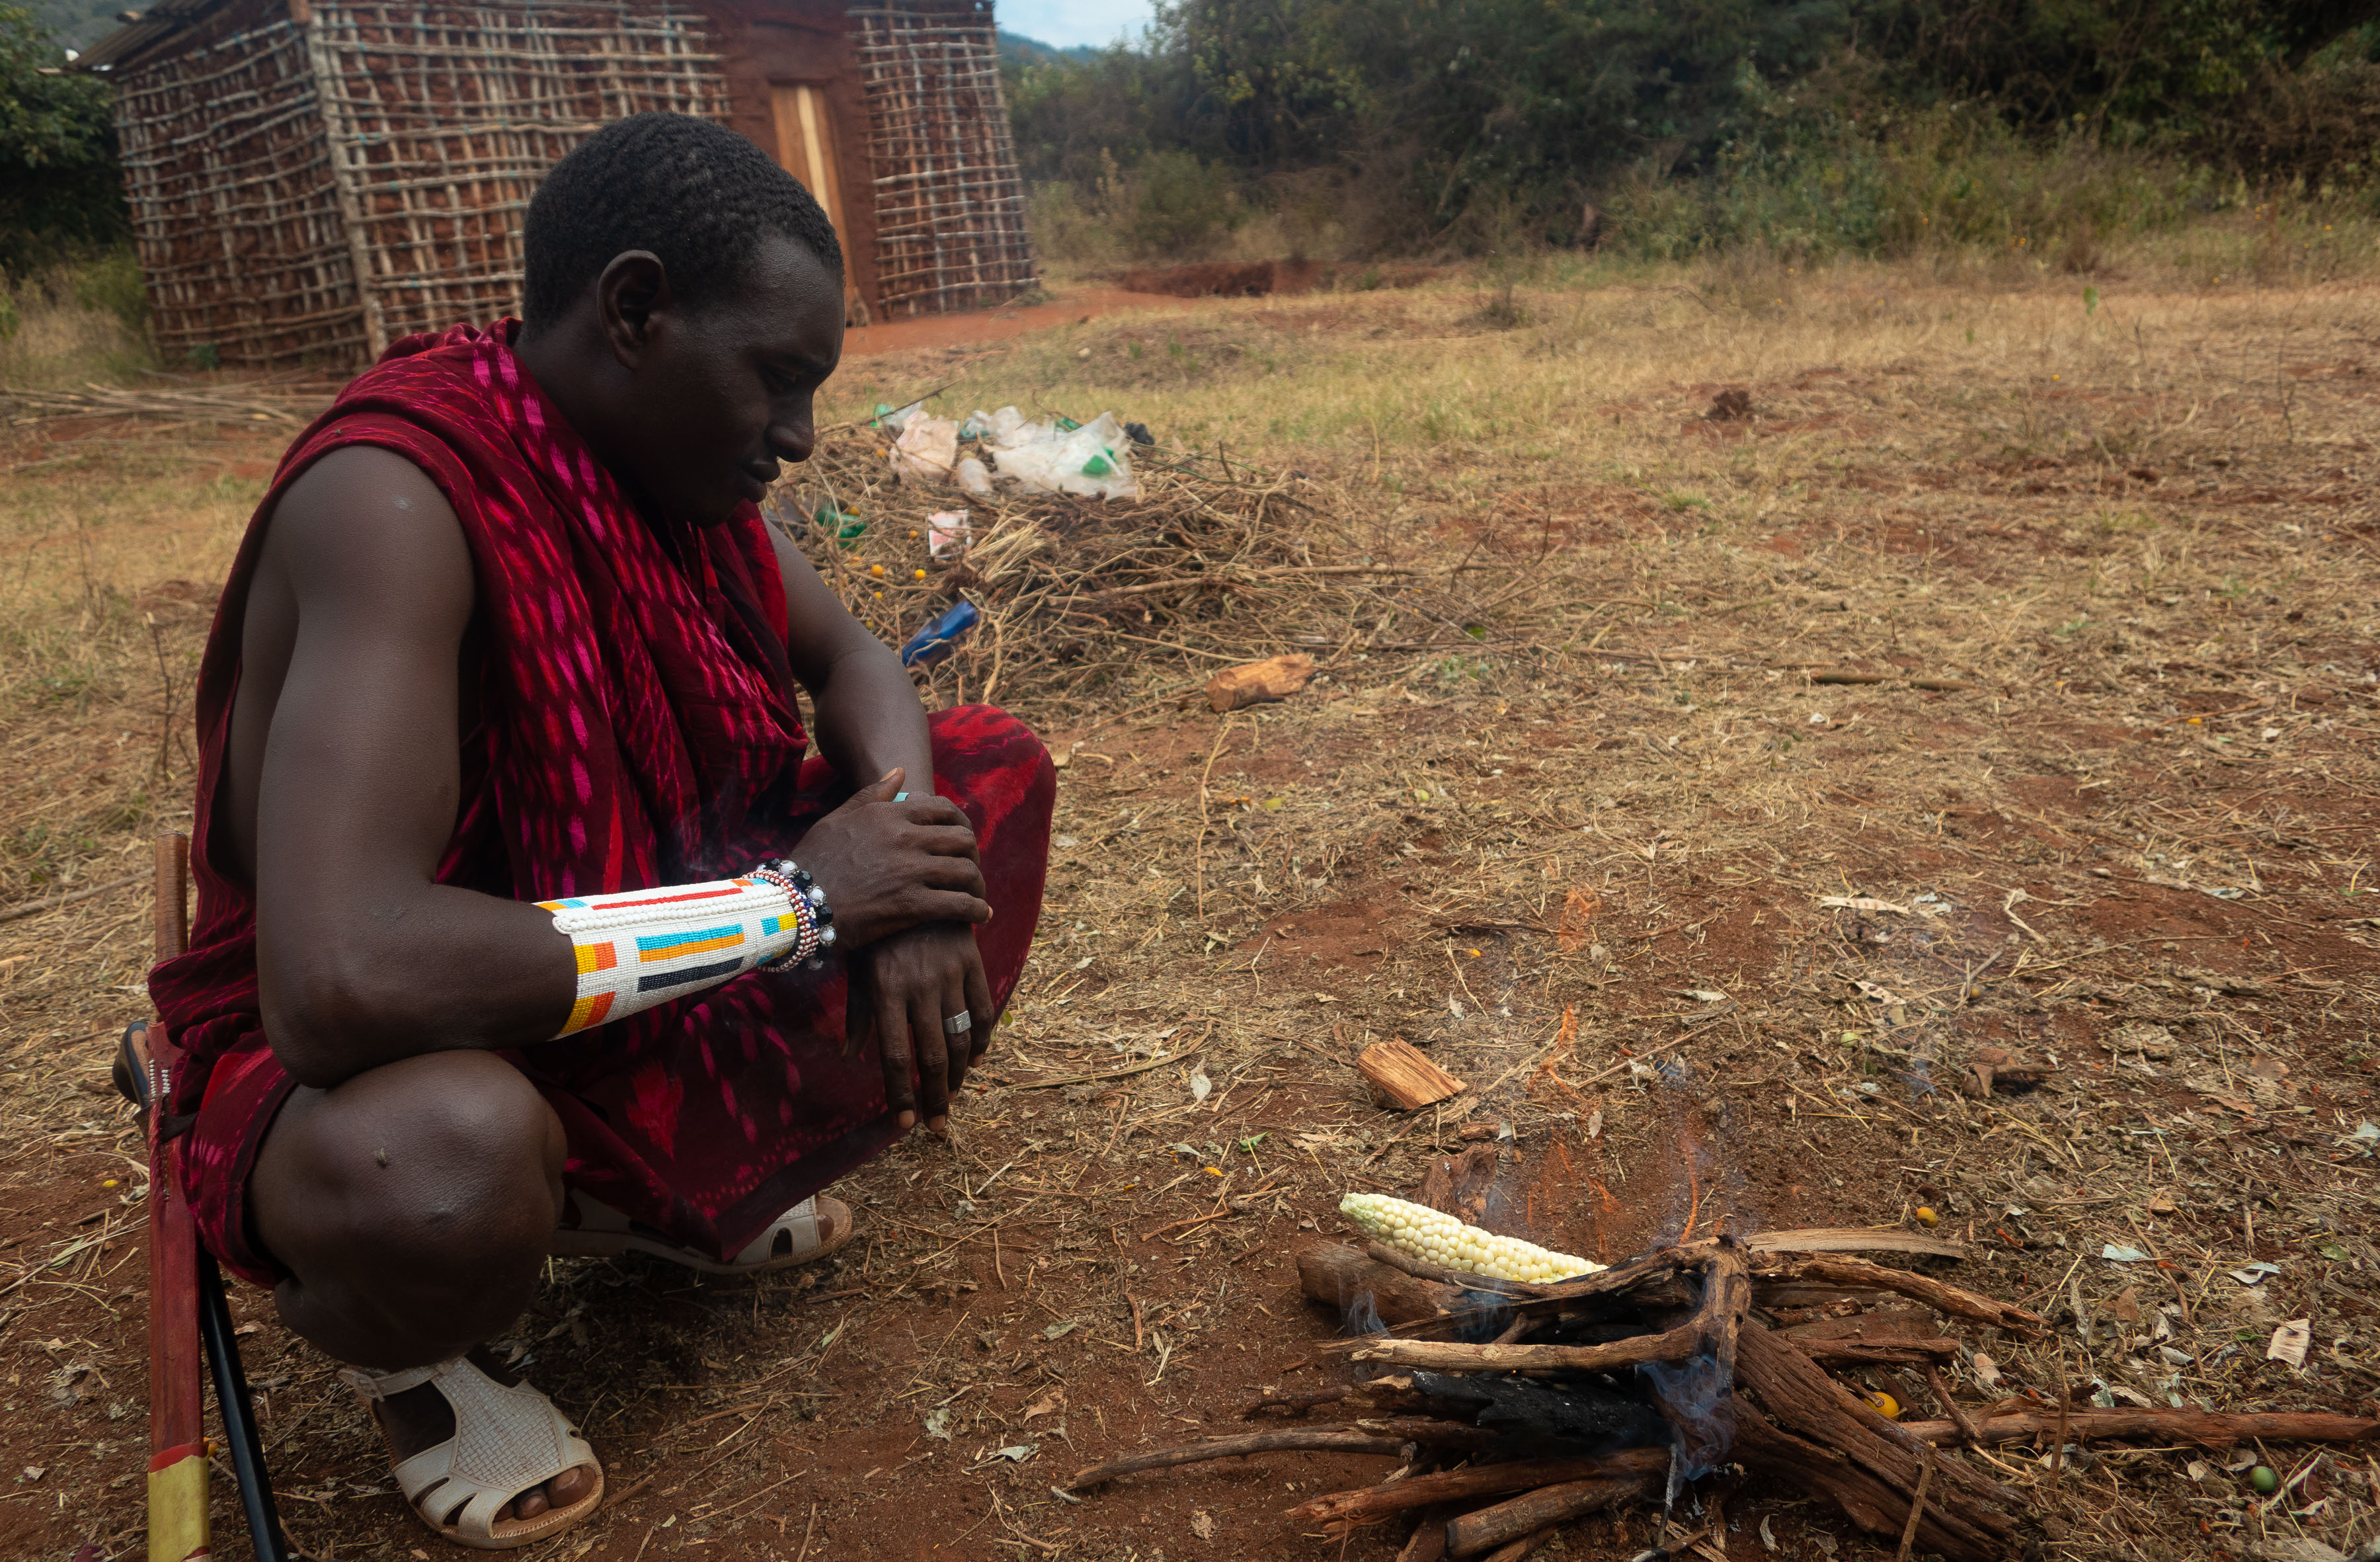 Maize: Matteo is roasting freshly picked maize, on a fire he made, in front of a pile of trash they will burn later. Maize is a primary crop of the Masai diet and they use it to make Ugali (a thick type of porridge), which is a staple food throughout Tanzania. 